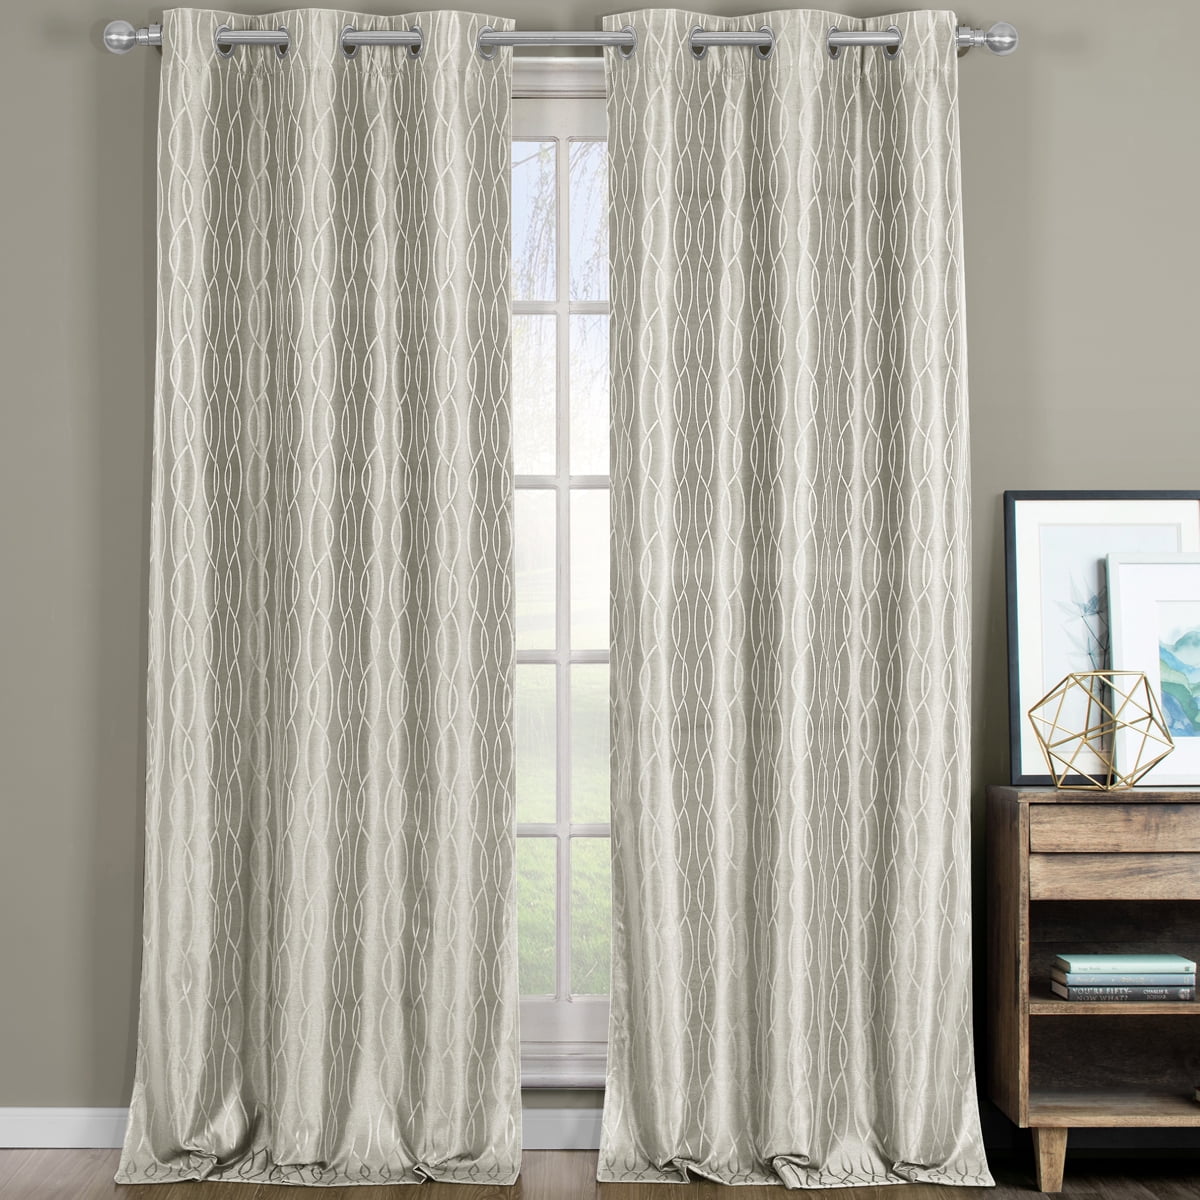 Details about   LUXURY PAISLEY JACQUARD CURTAINS  FULLY LINED PANEL BLACK TAPE TOP 